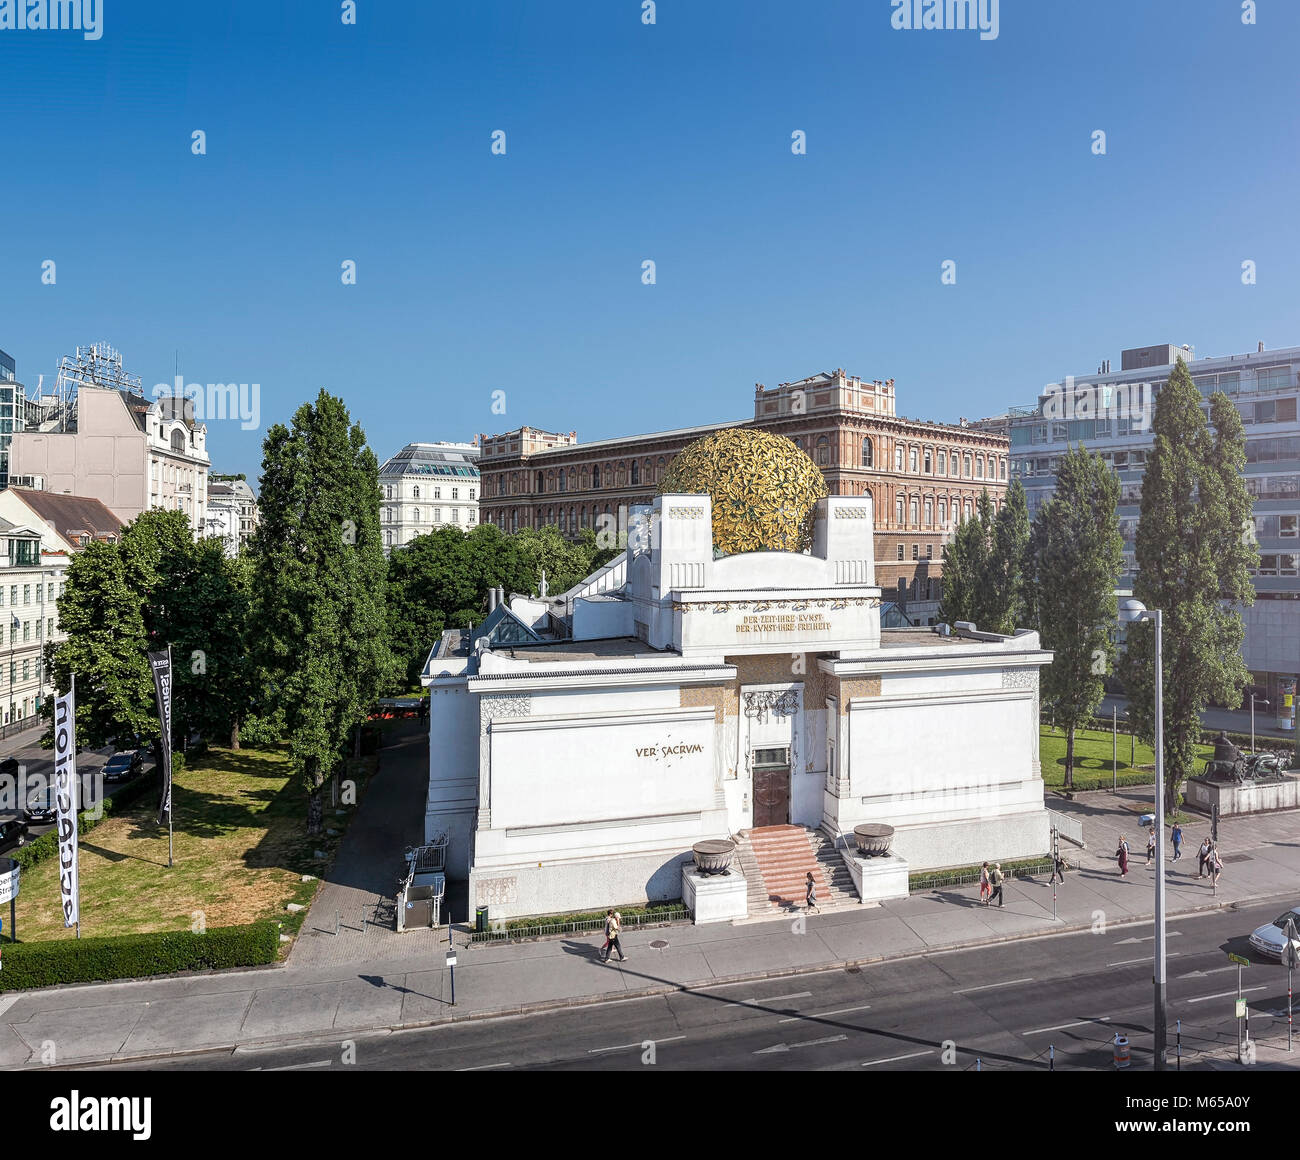 Secession Building, an Exhibition Hall for Contemporary Art, Vienna, Austria. It was built in 1897 by Joseph Maria Olbrich as architectural manifesto. Stock Photo